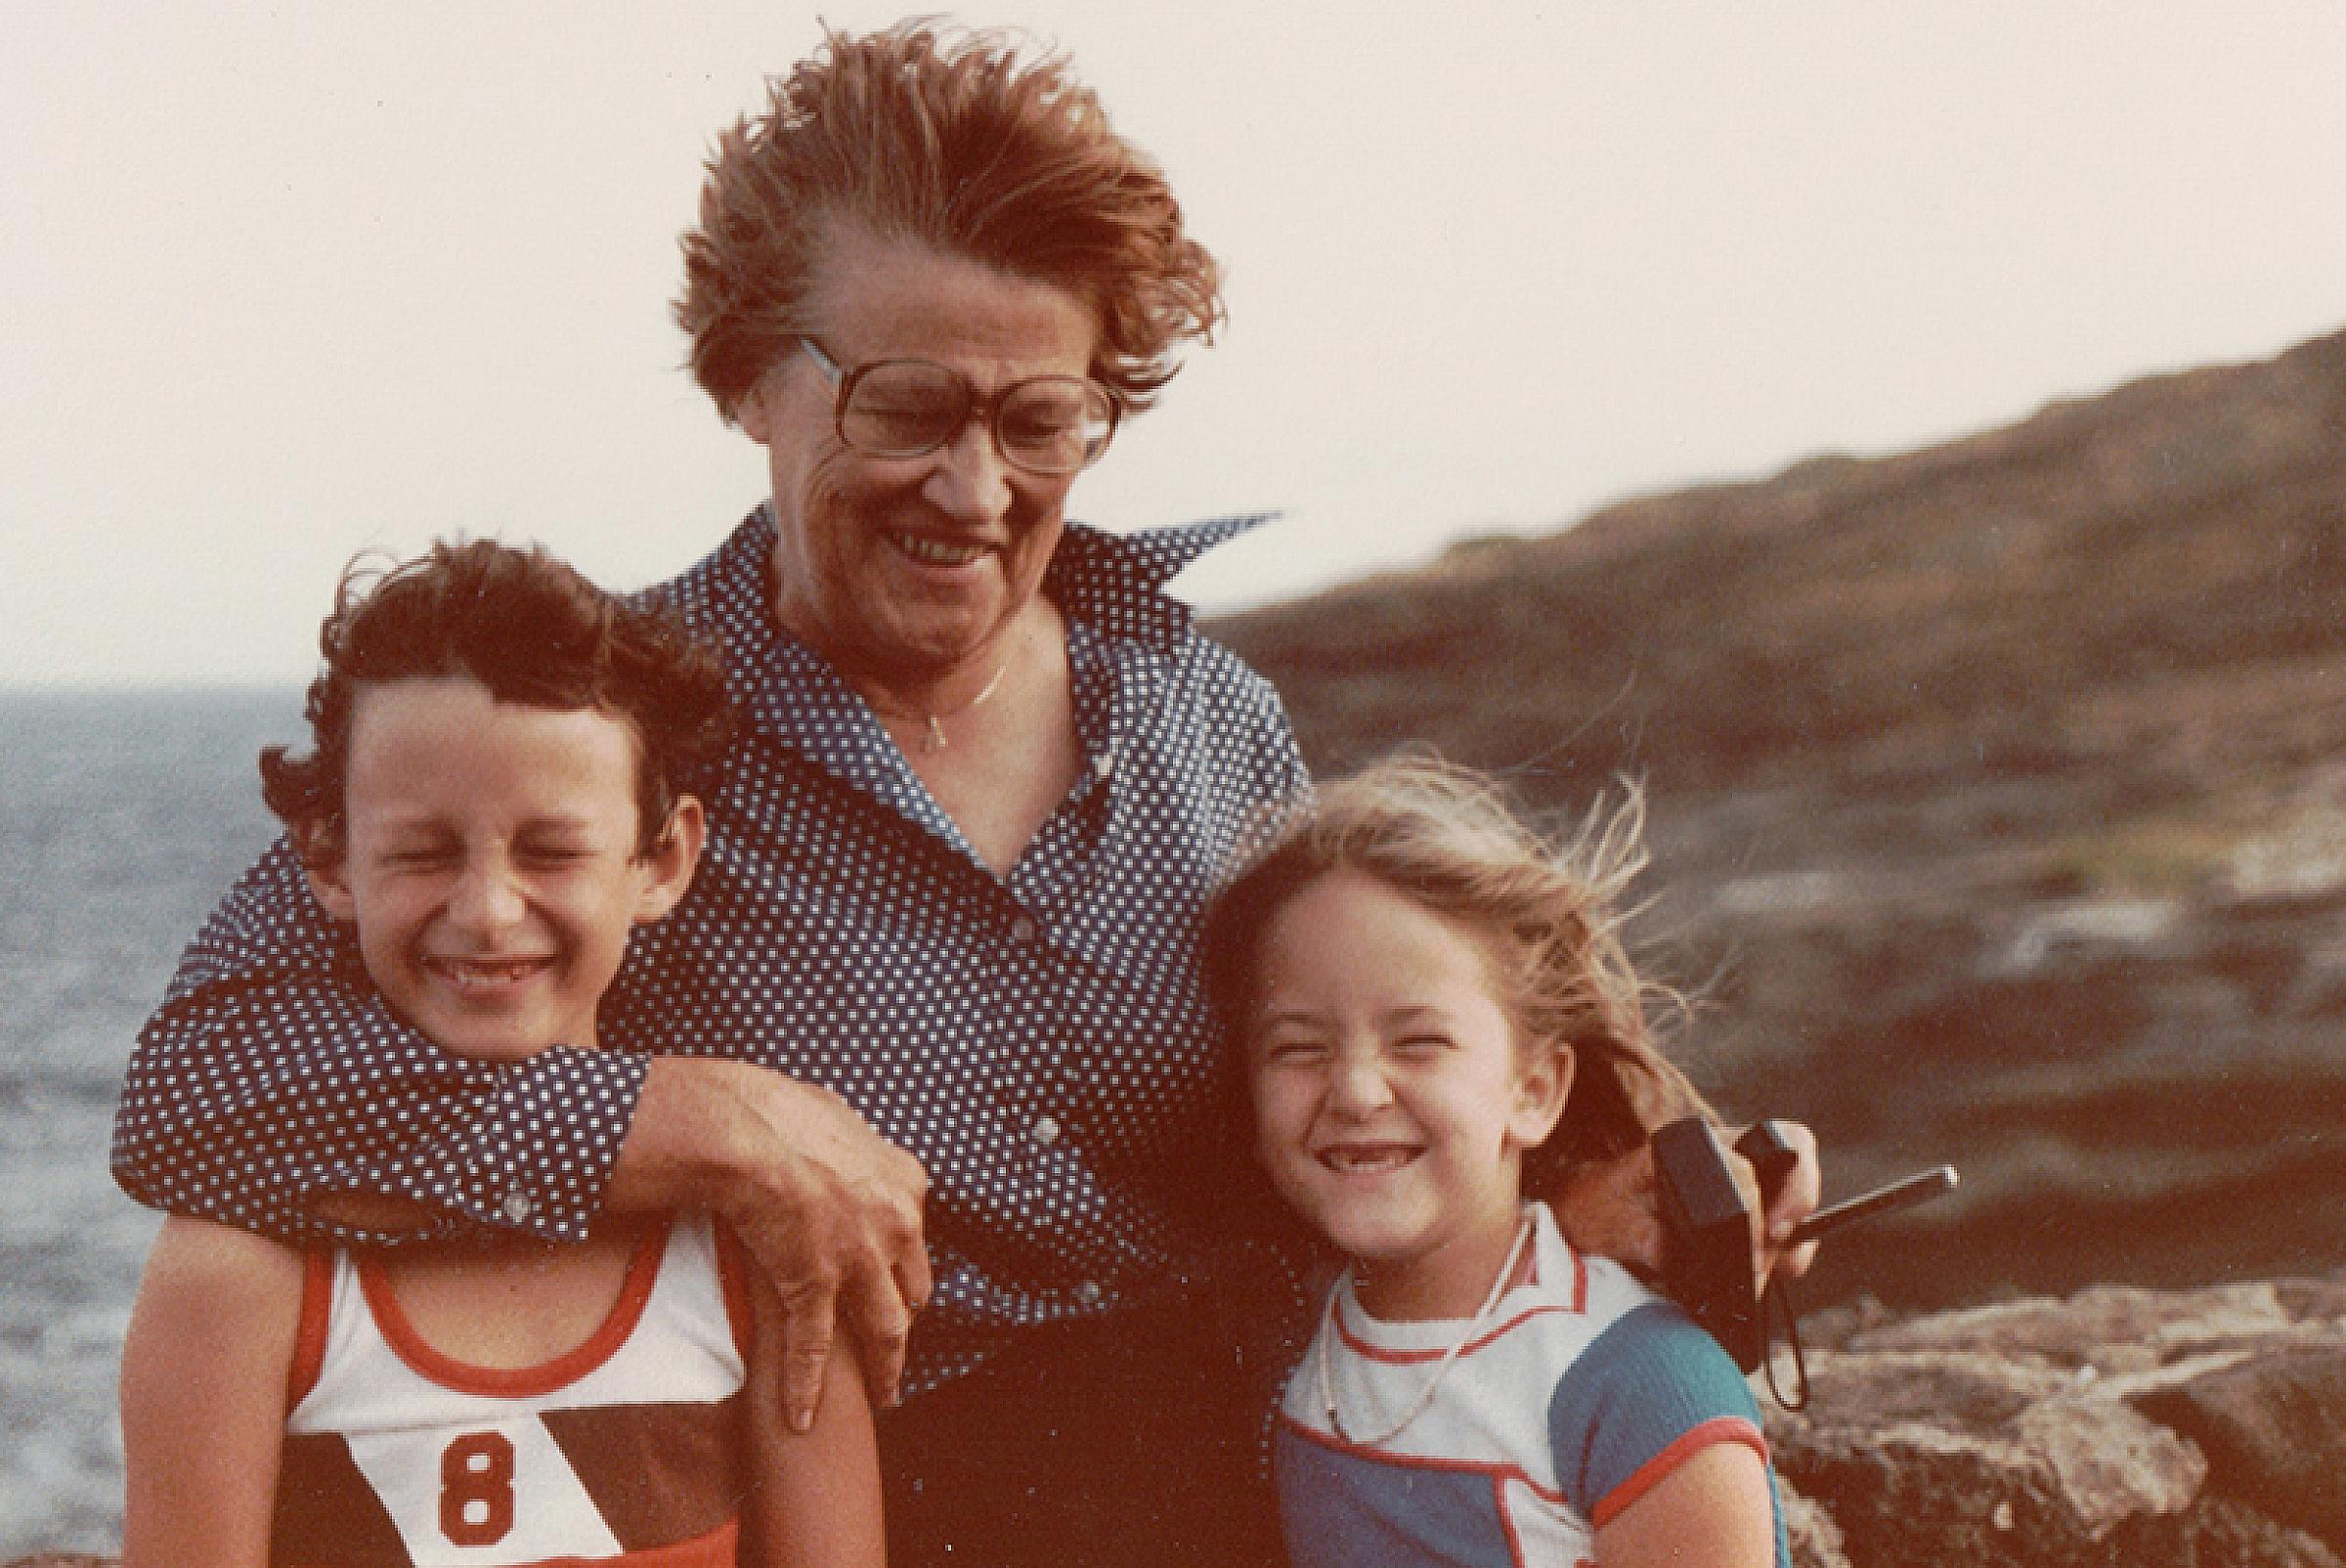 Amy Olsen (left) with brother and grandma